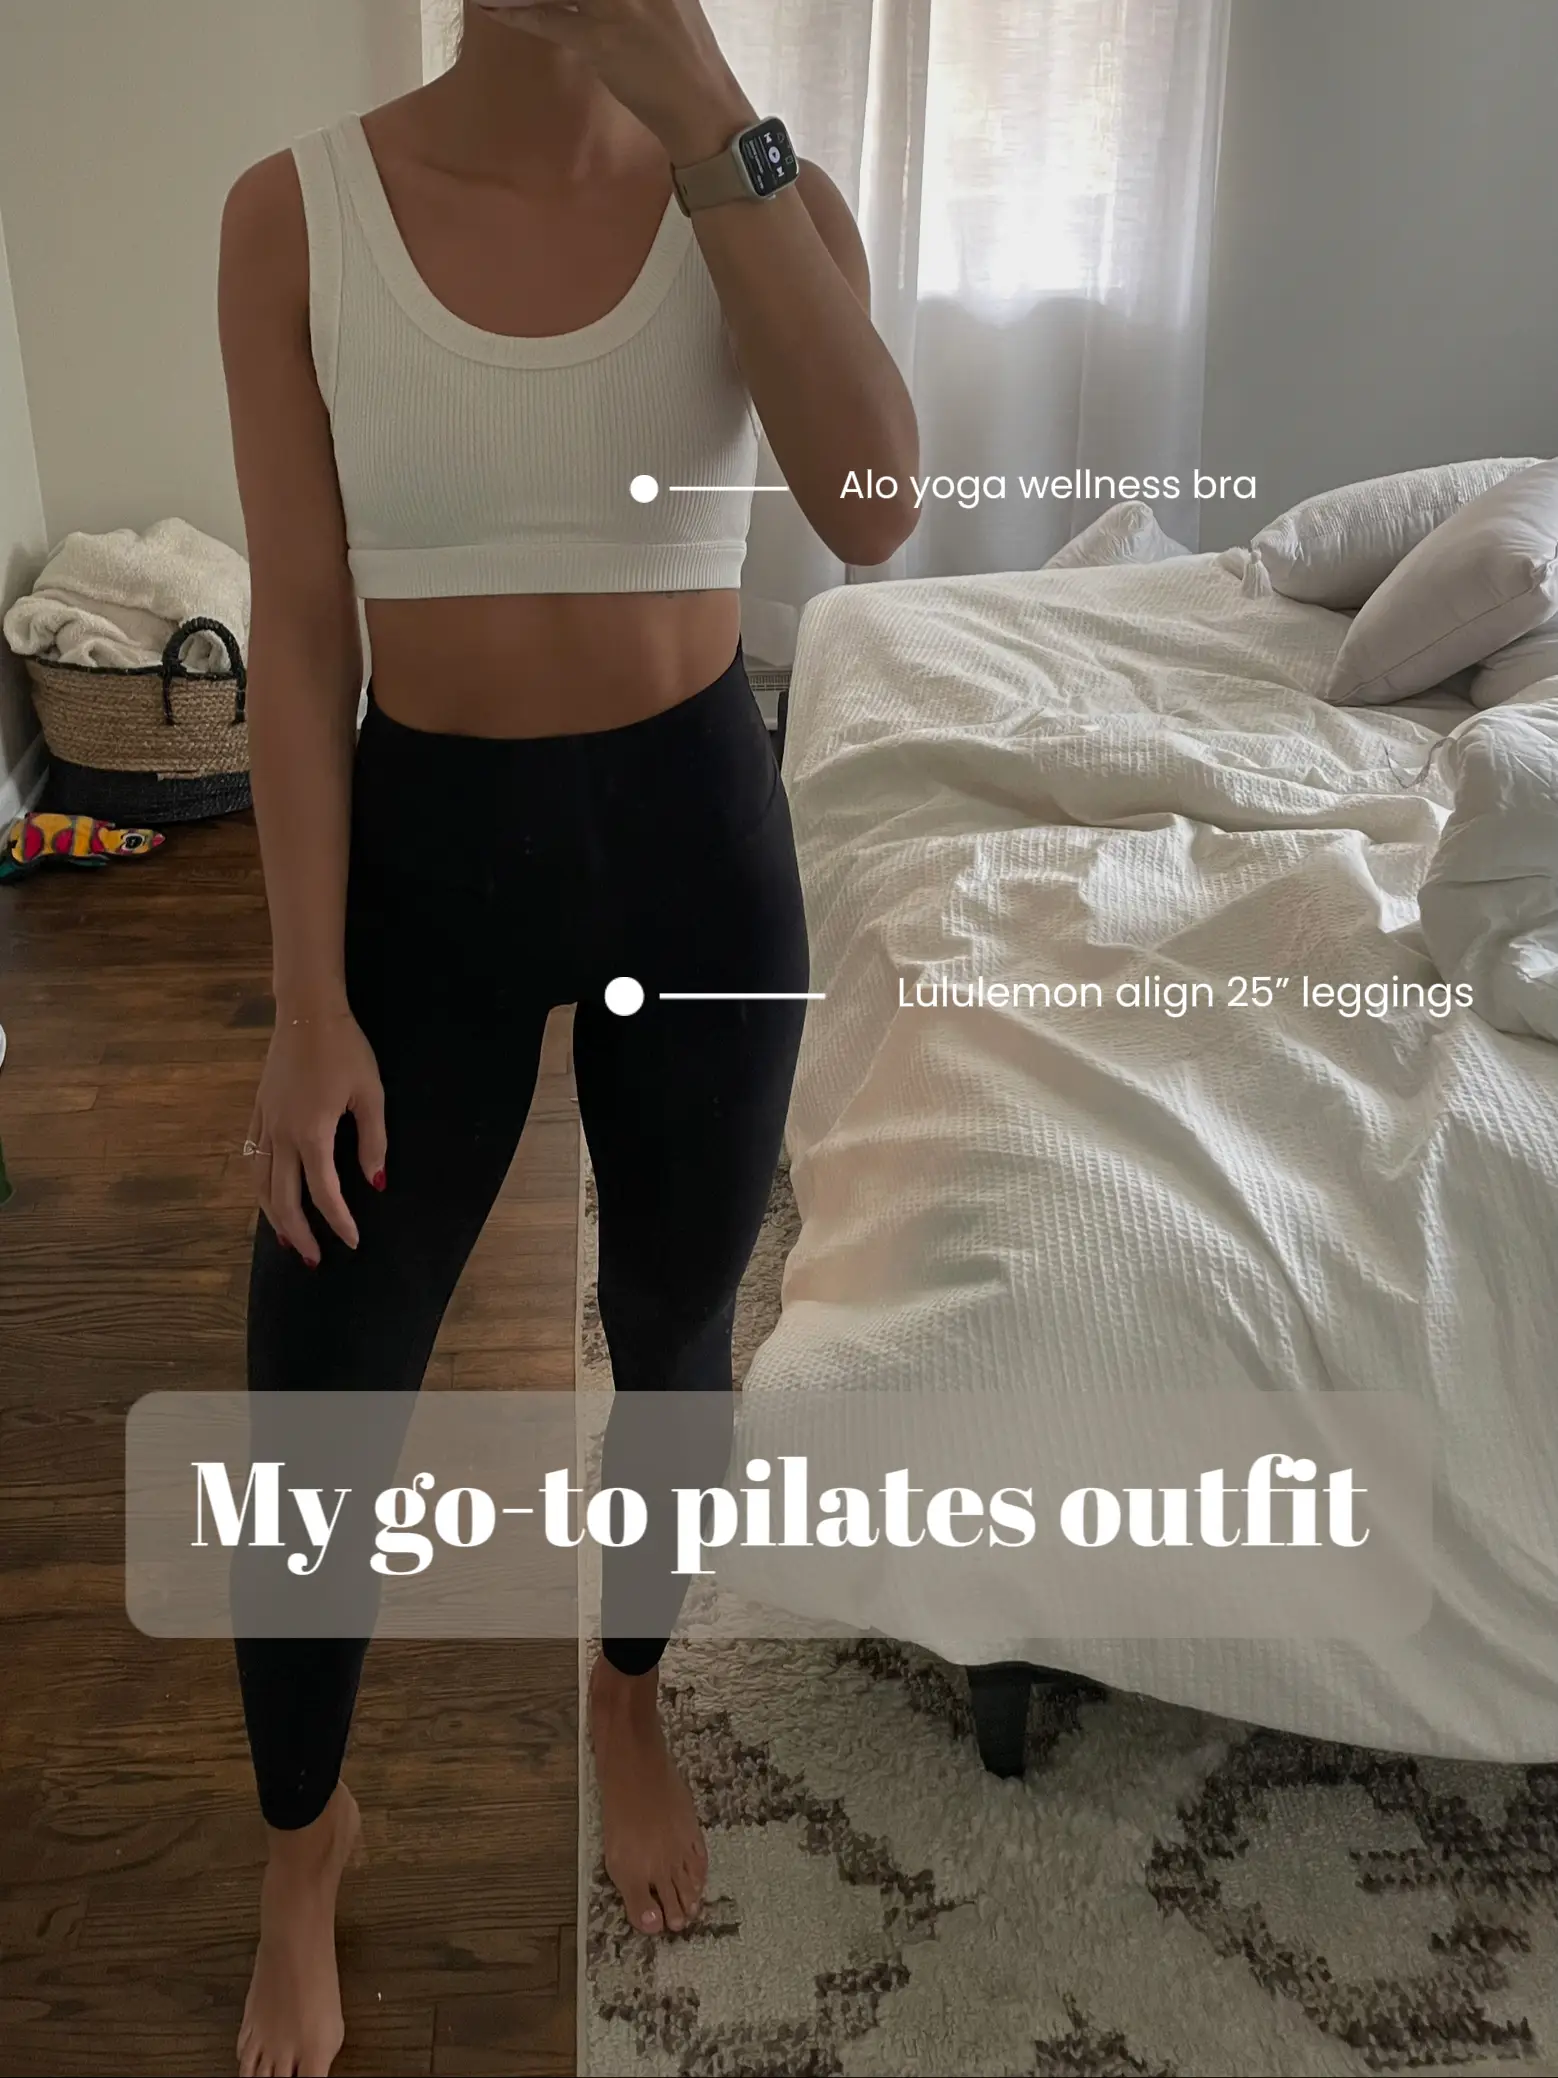 My go-to pilates outfit🤍, Gallery posted by Justgotocourt